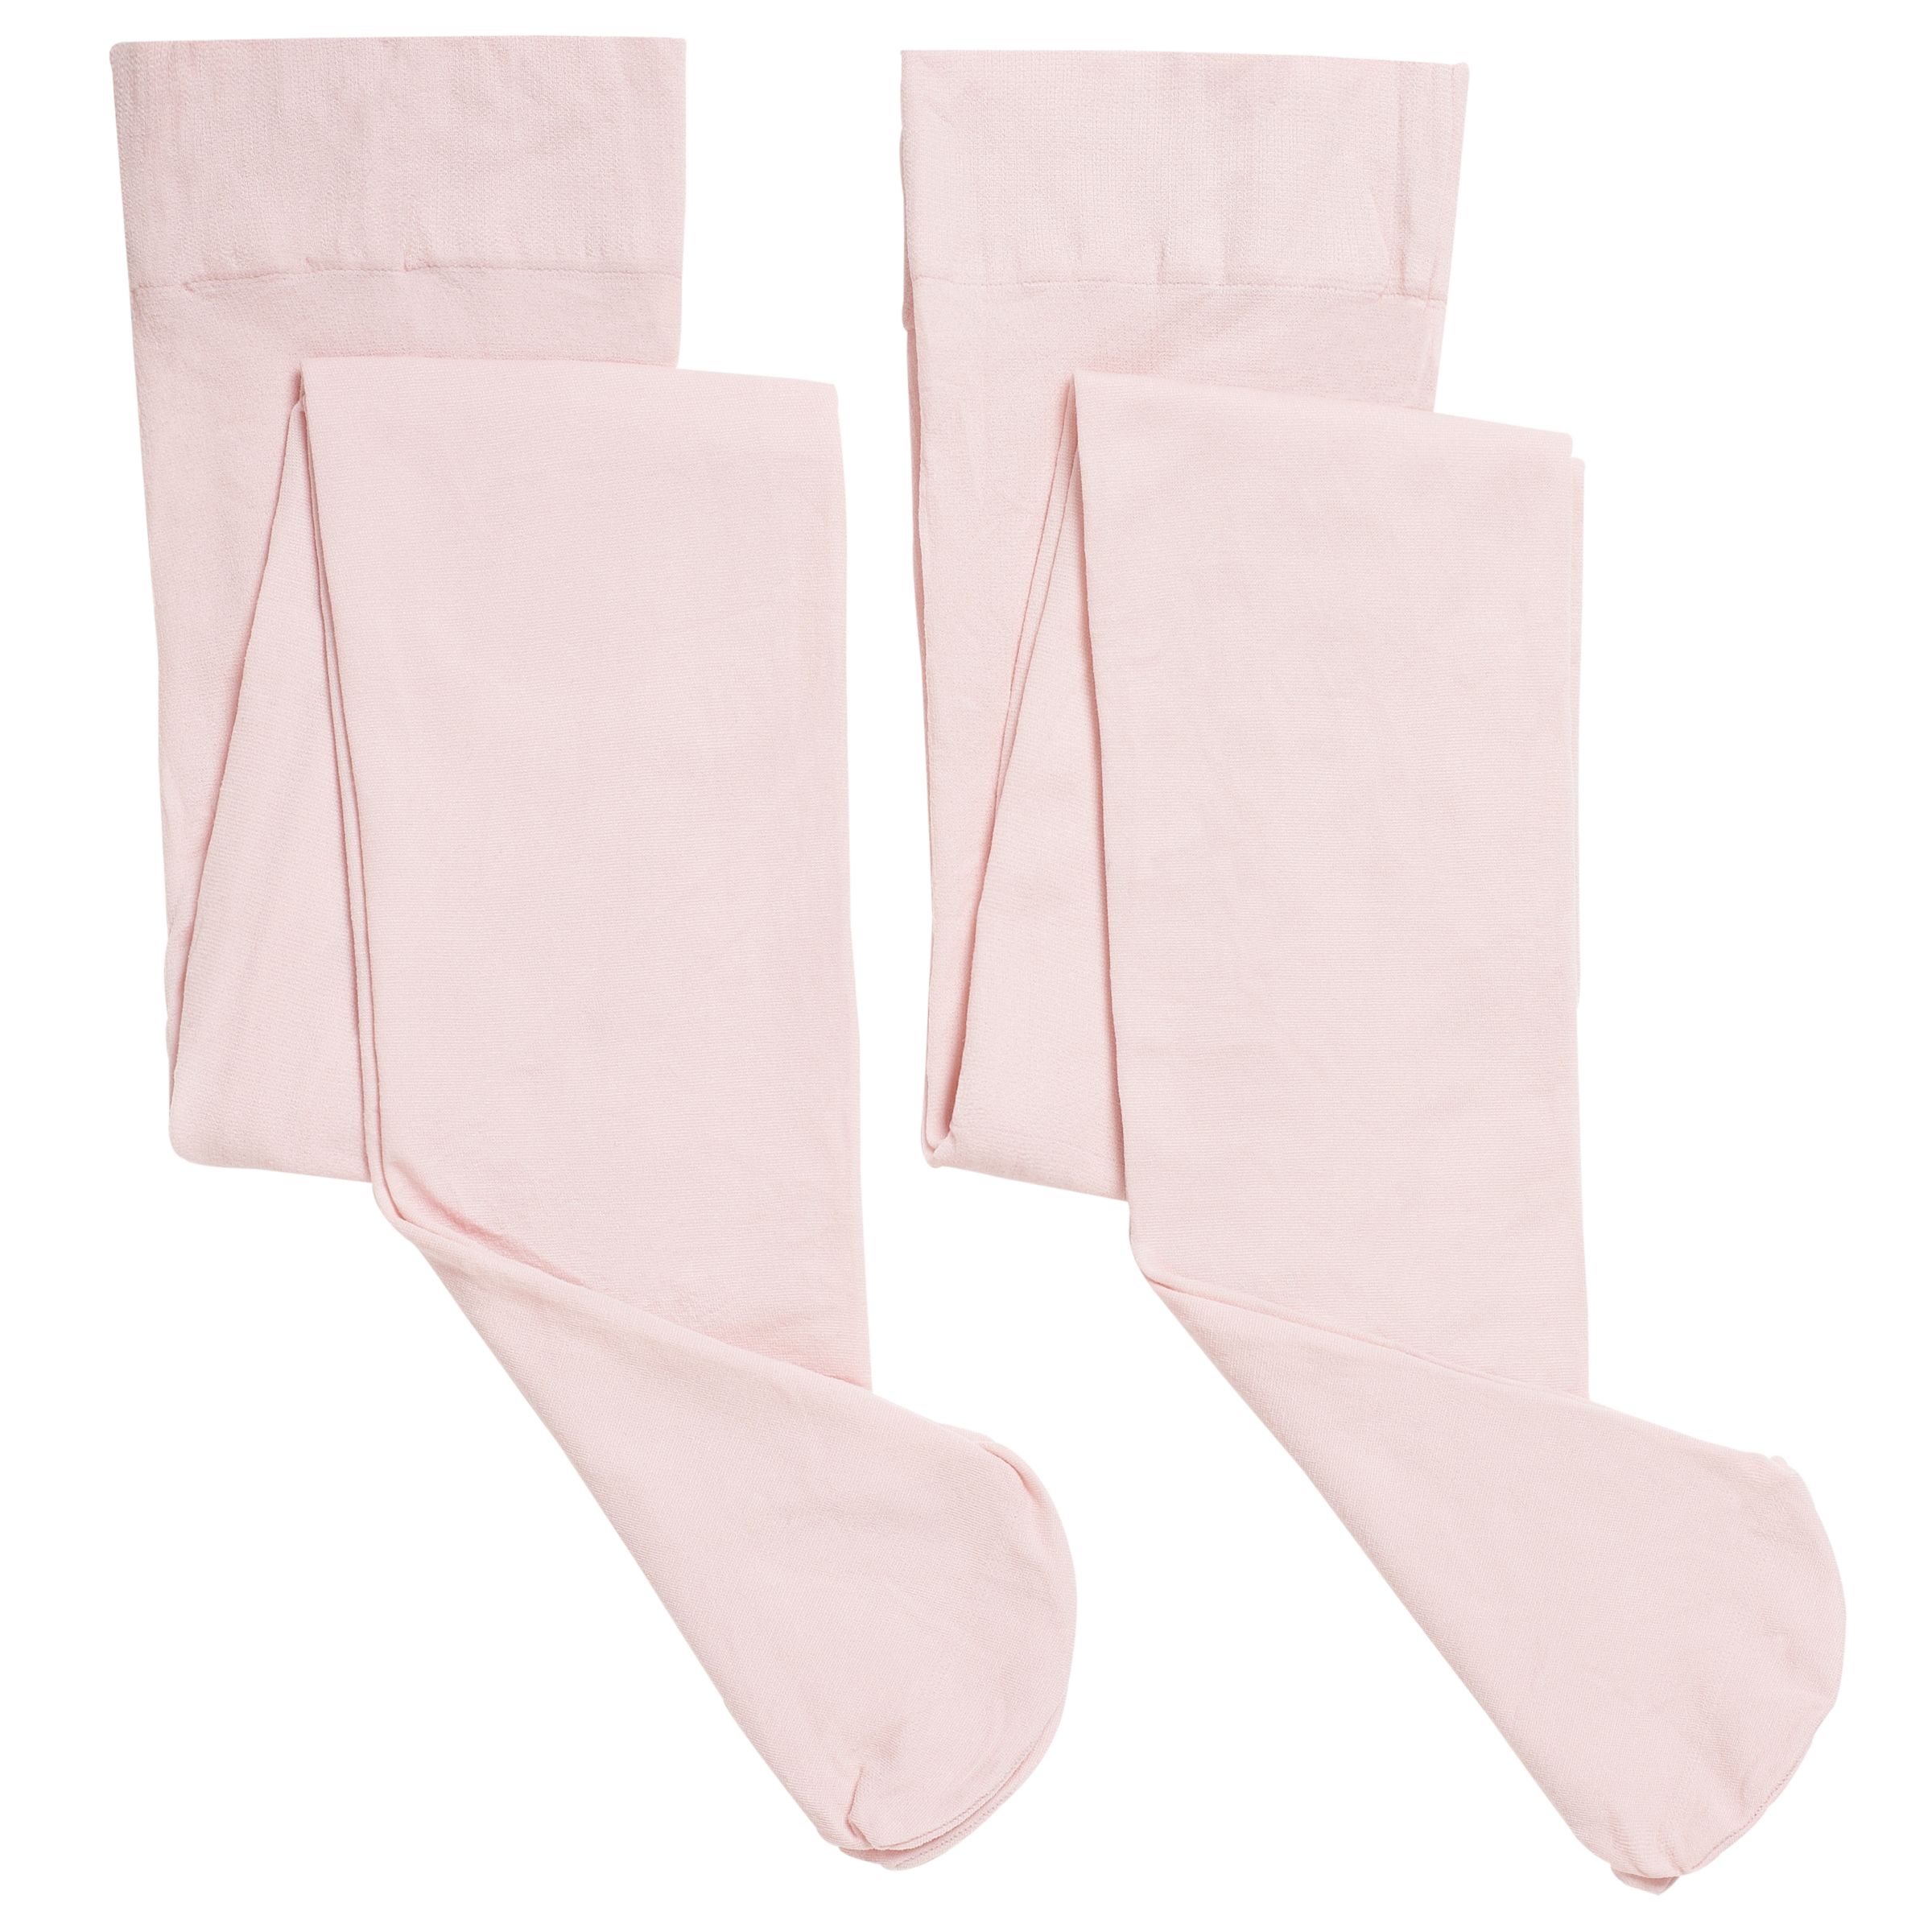 John Lewis ANYDAY Kids' Opaque Tights, Pack of 2, Pink, 13-15 Years